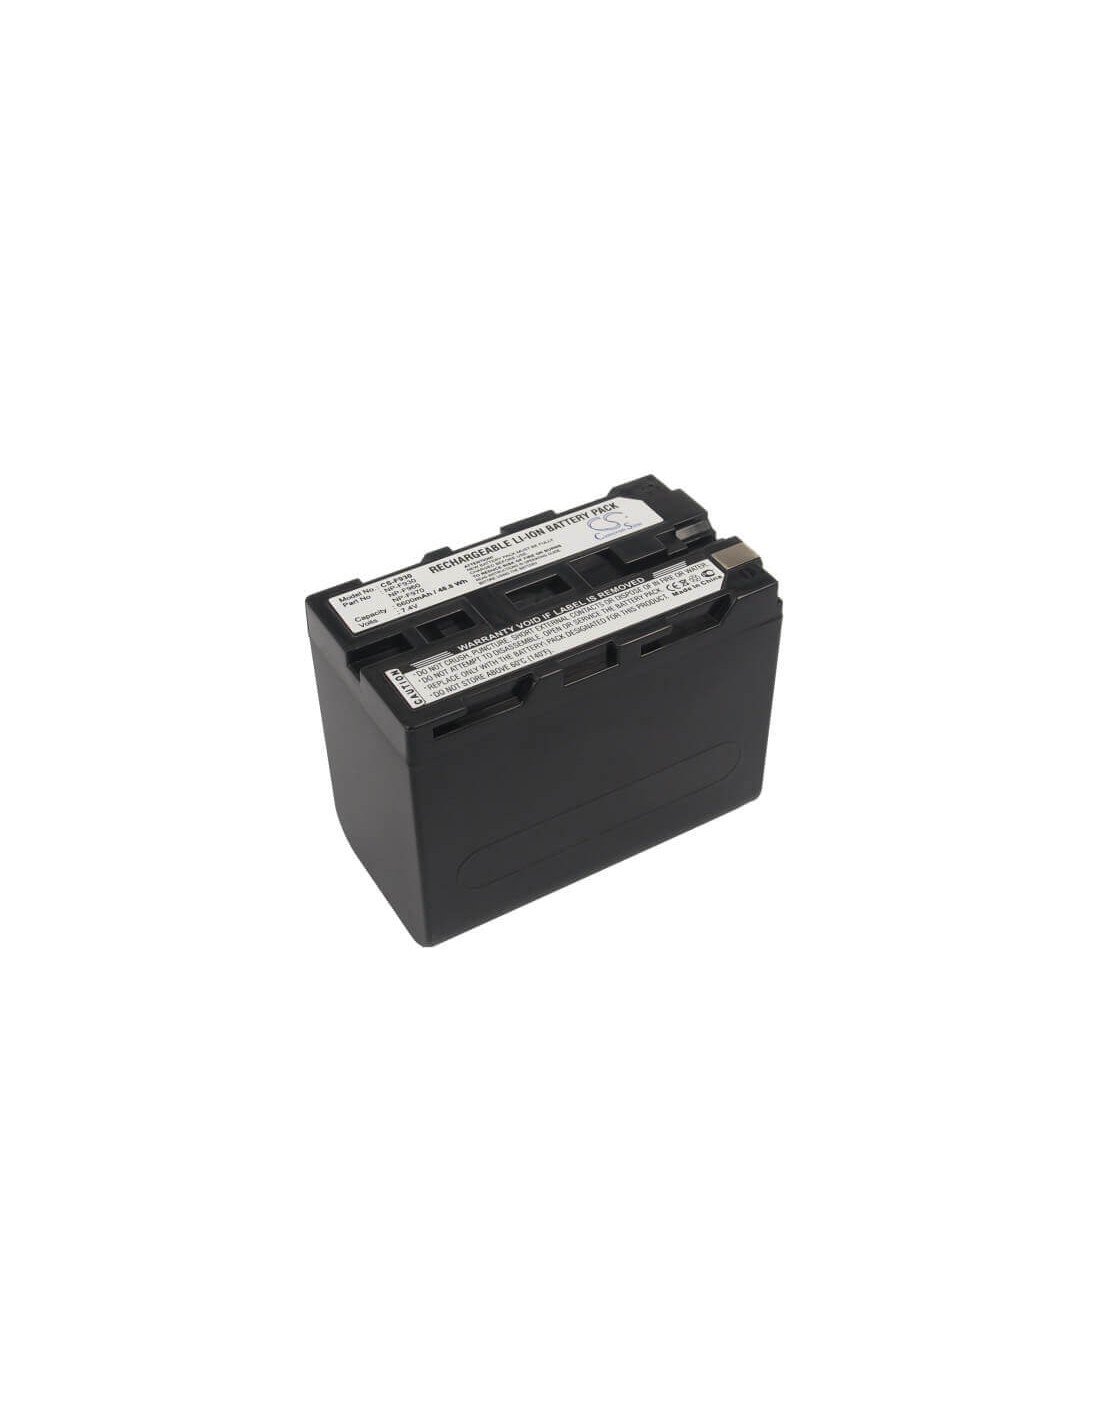 Battery for Sony Ccd-sc5, Ccd-tr3, Ccd-tr918, Ccd-trv26e, 7.4V, 6600mAh - 48.84Wh